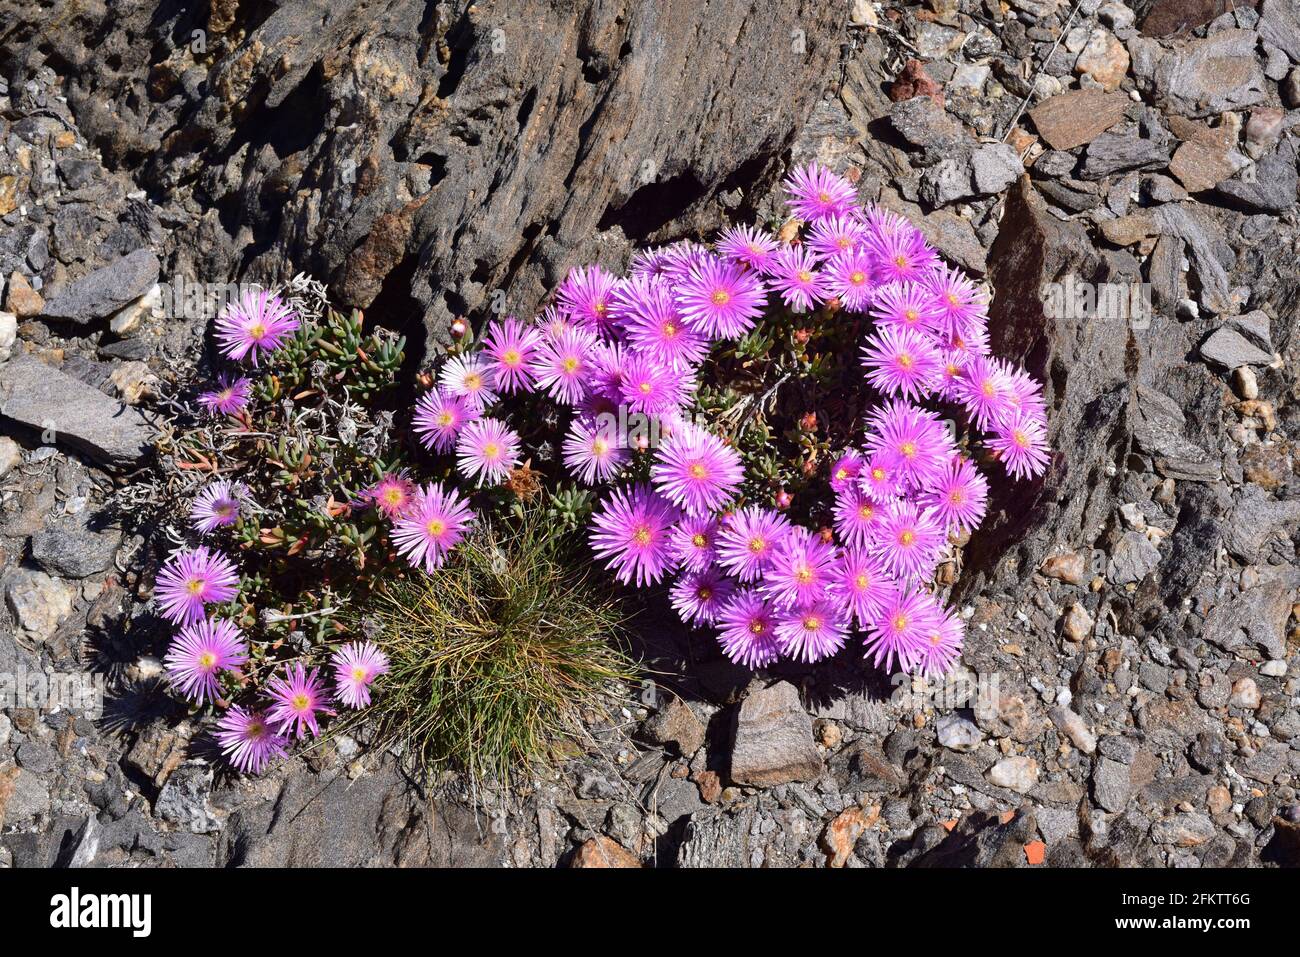 Pink carpet or trailing iceplant (Delosperma cooperi or Mesembryanthemum cooperi) is a creeping succulent plant native to South Africa and Stock Photo